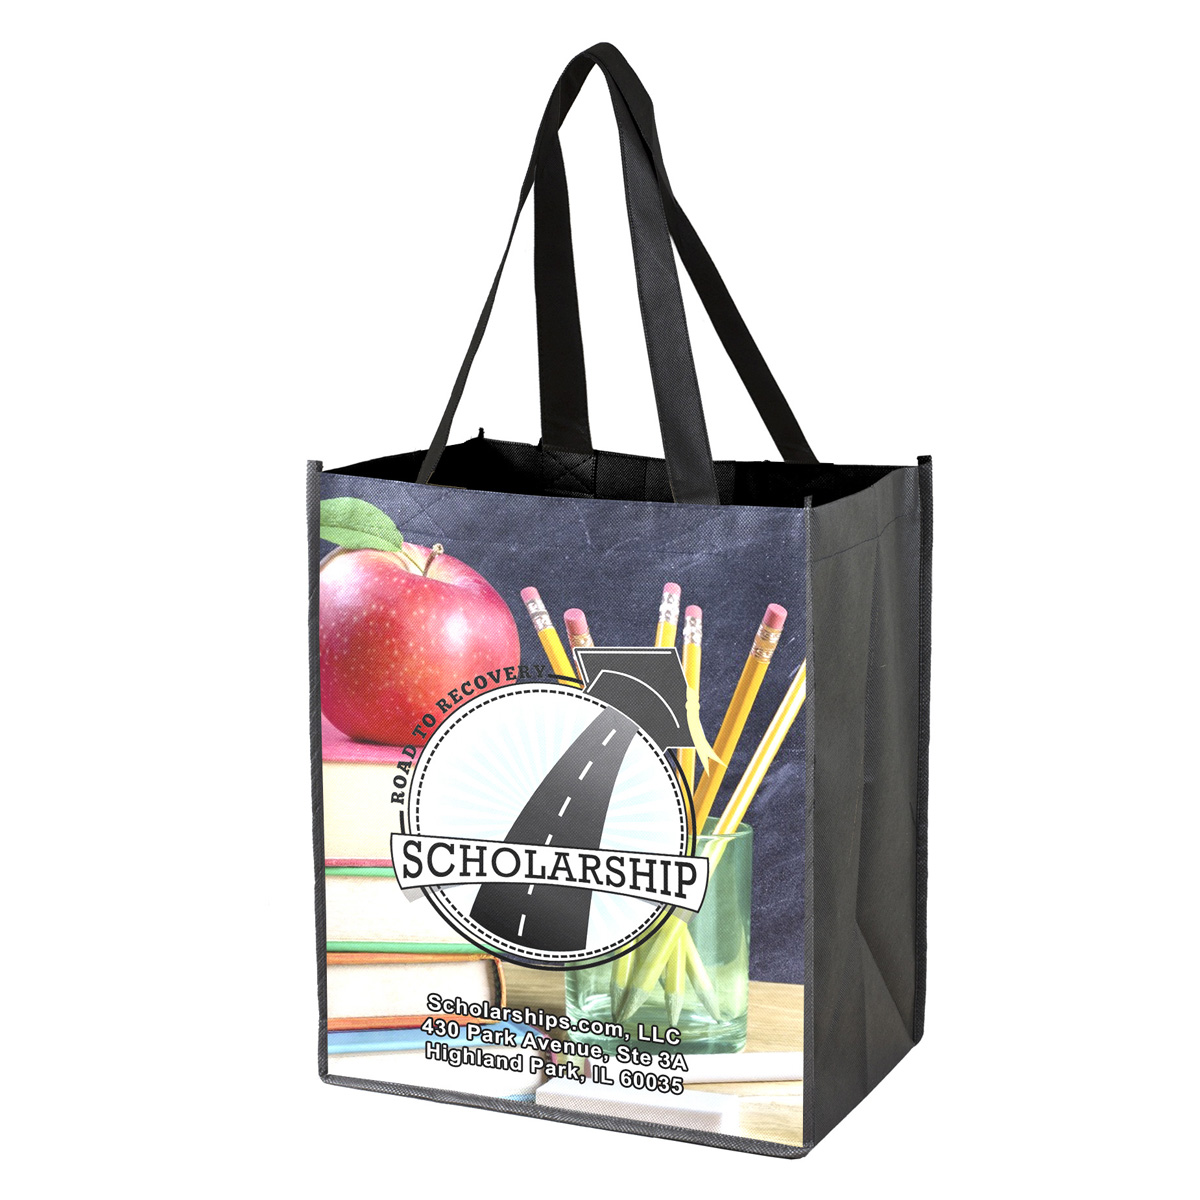 “SOUTH COAST” 12” W x 13” H Full Color Import Air Ship Glossy Lamination Grocery Shopping Tote Bags